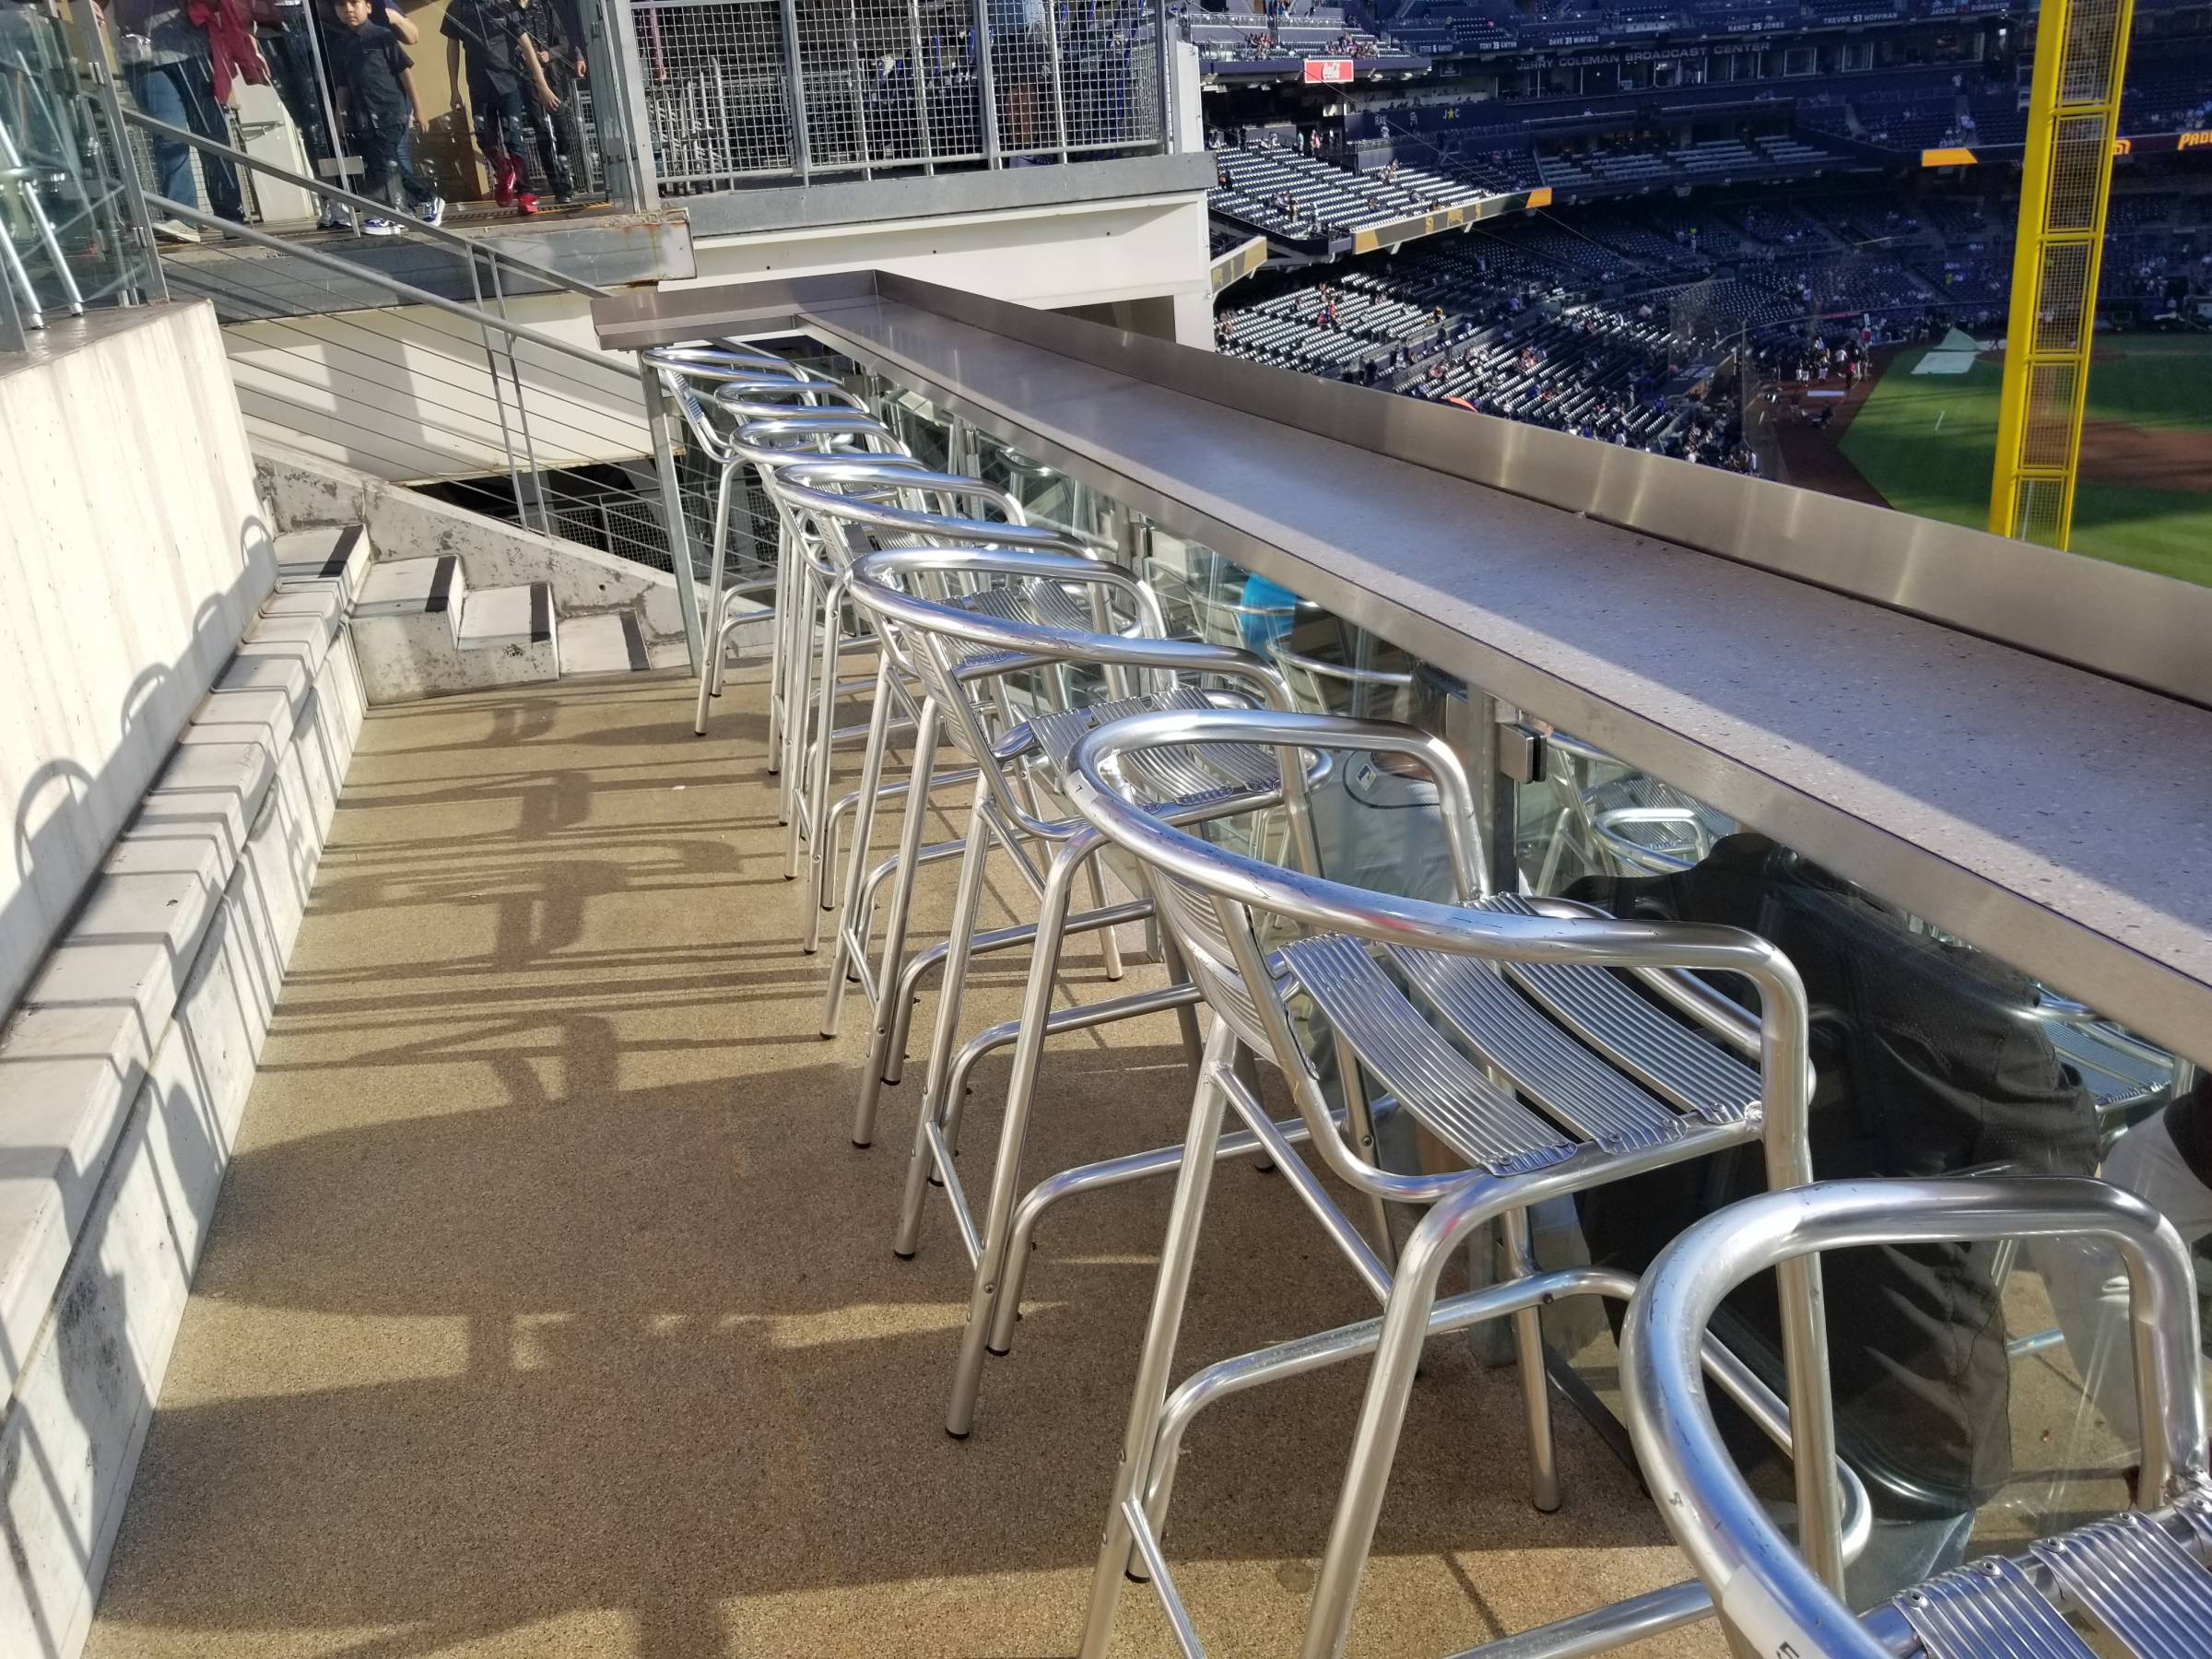 Bar-style seating at Bud Patio